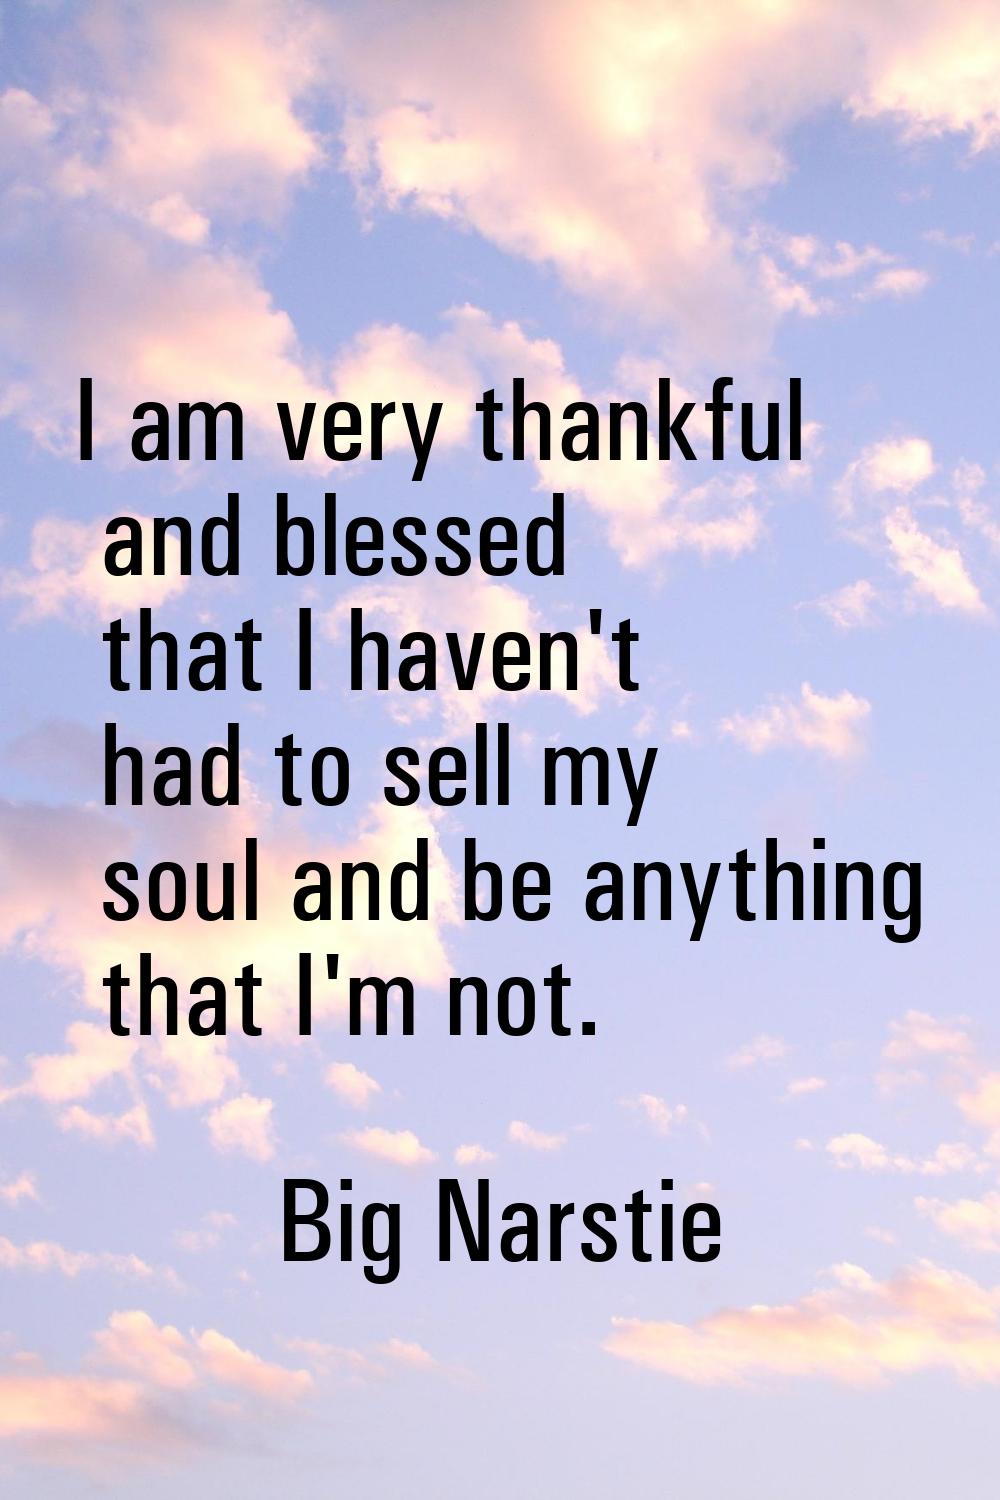 I am very thankful and blessed that I haven't had to sell my soul and be anything that I'm not.